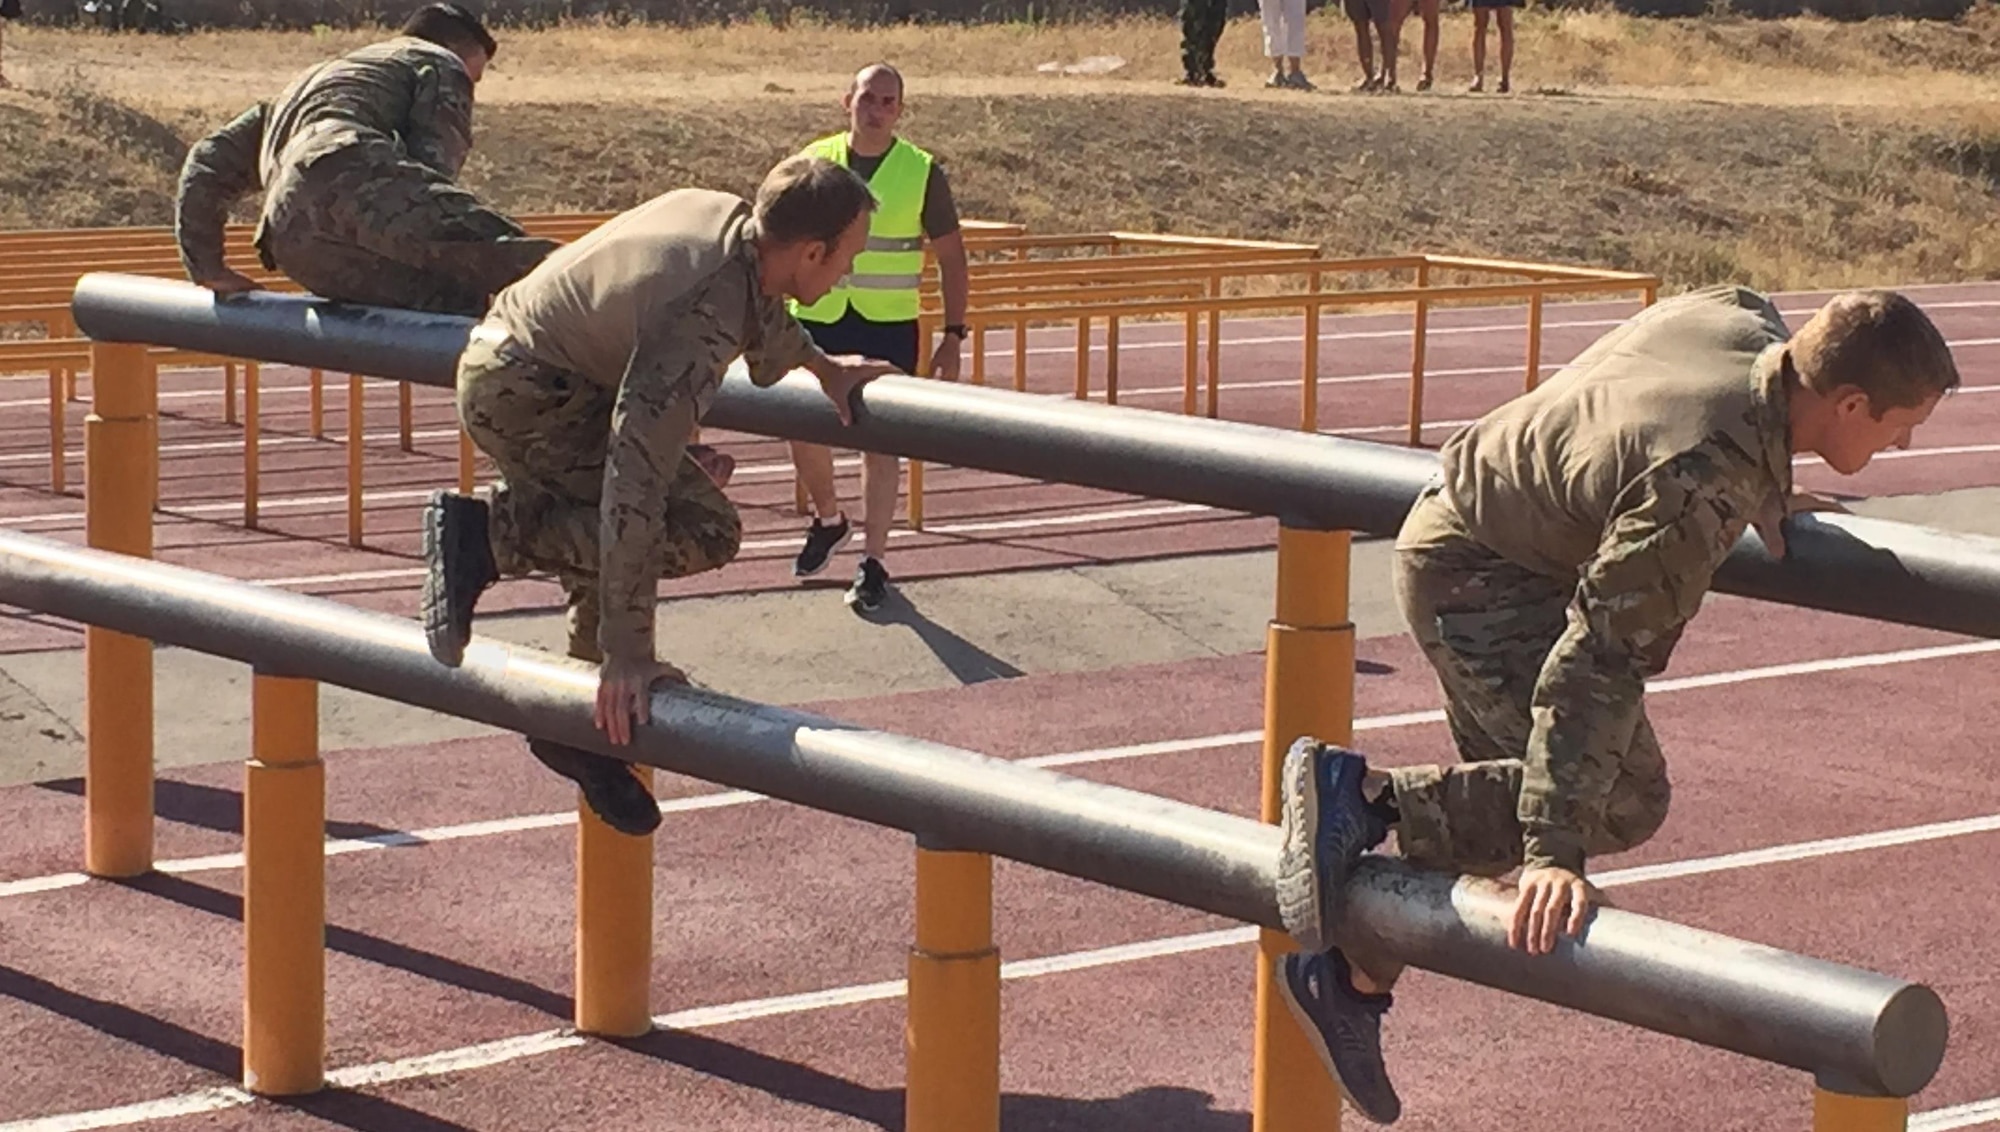 Team USA 3 tackles the second obstacle on the 500 meter, NATO-standard, obstacle course.  Each member must touch one foot between the two bars and then vault the higher bar.  (L to R)1st Lt. Sterling Broadhead, Capt. Chuck Francis and 2nd Lt. Nate Davis (Mississippi Army National Guard).